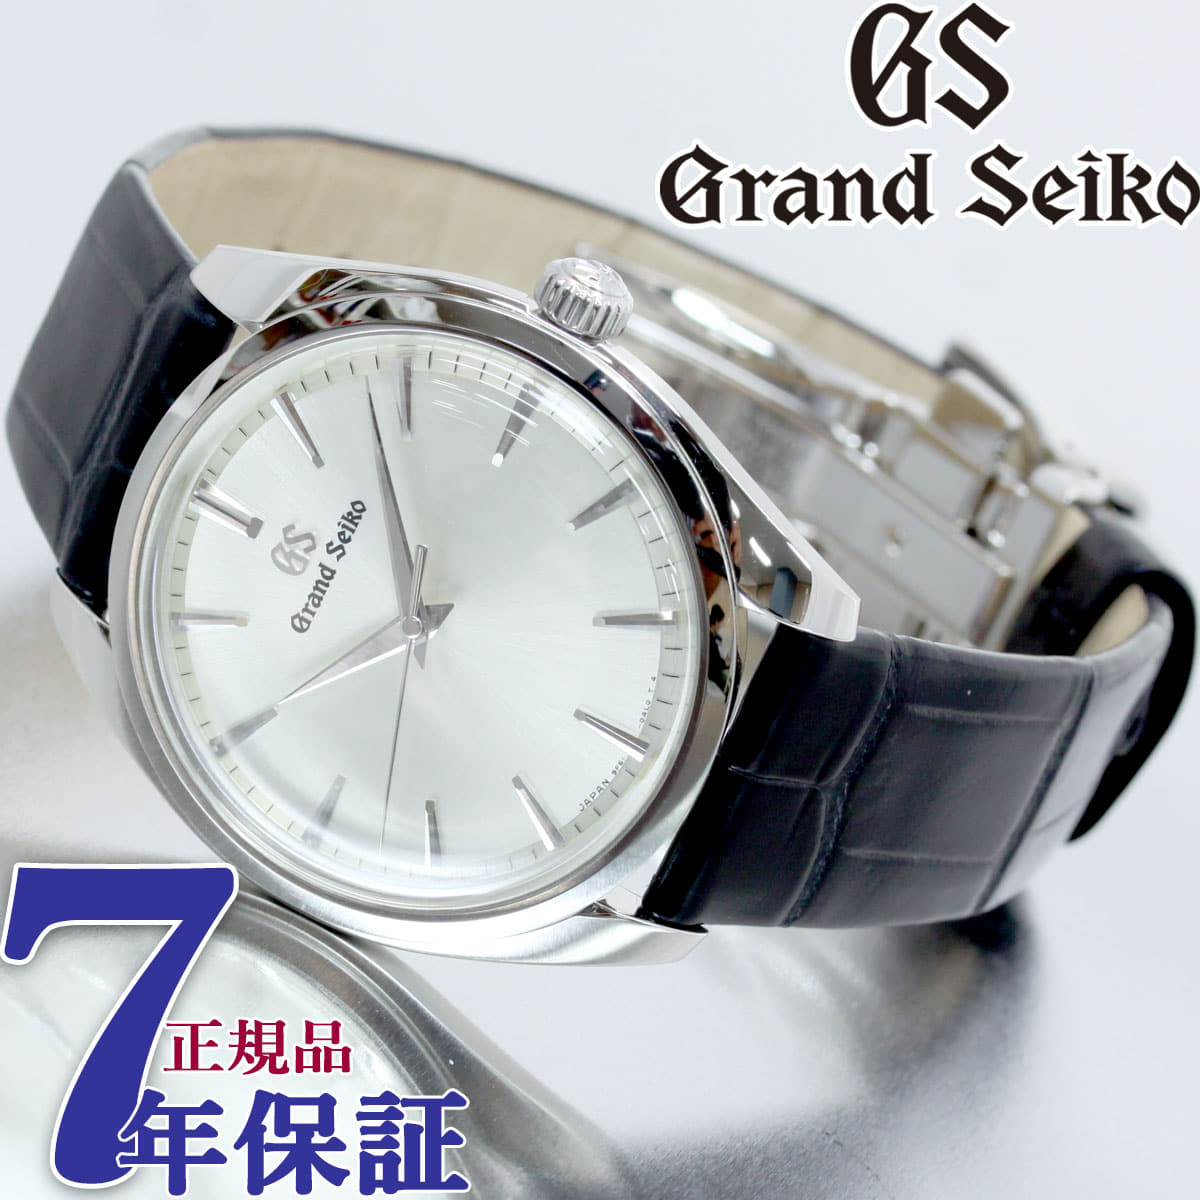 New]GRAND SEIKO Men's Watch Elegance Collection SBGX331 - BE FORWARD Store